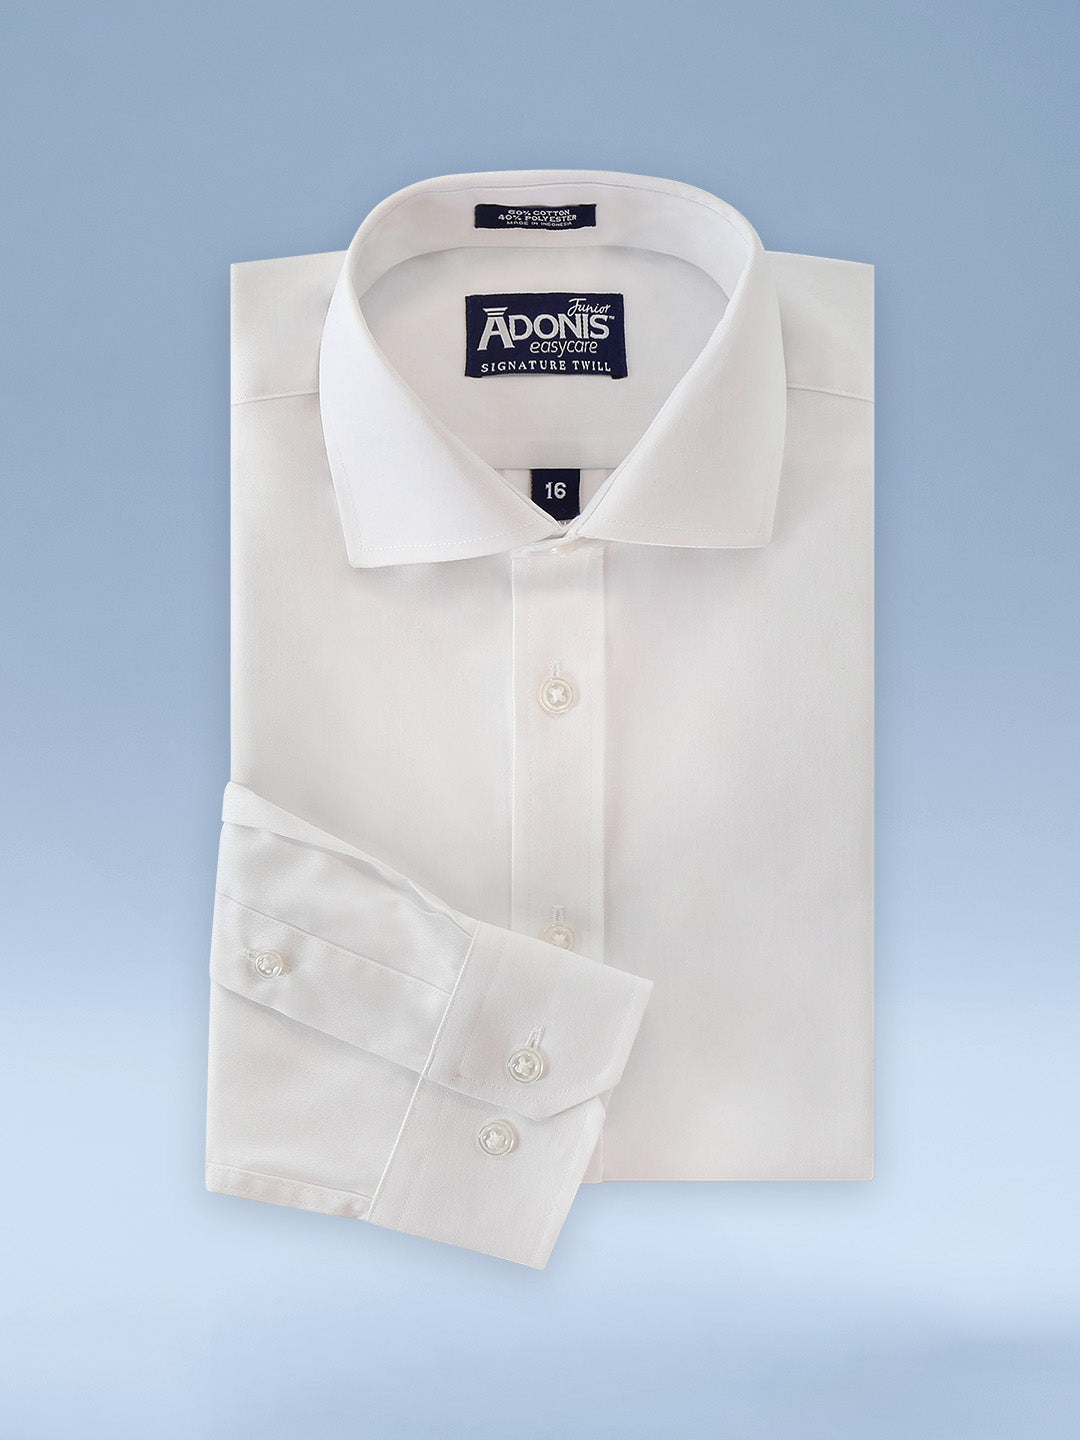 Boys Classic Fit Easy Care Signature Twill Dress Shirt